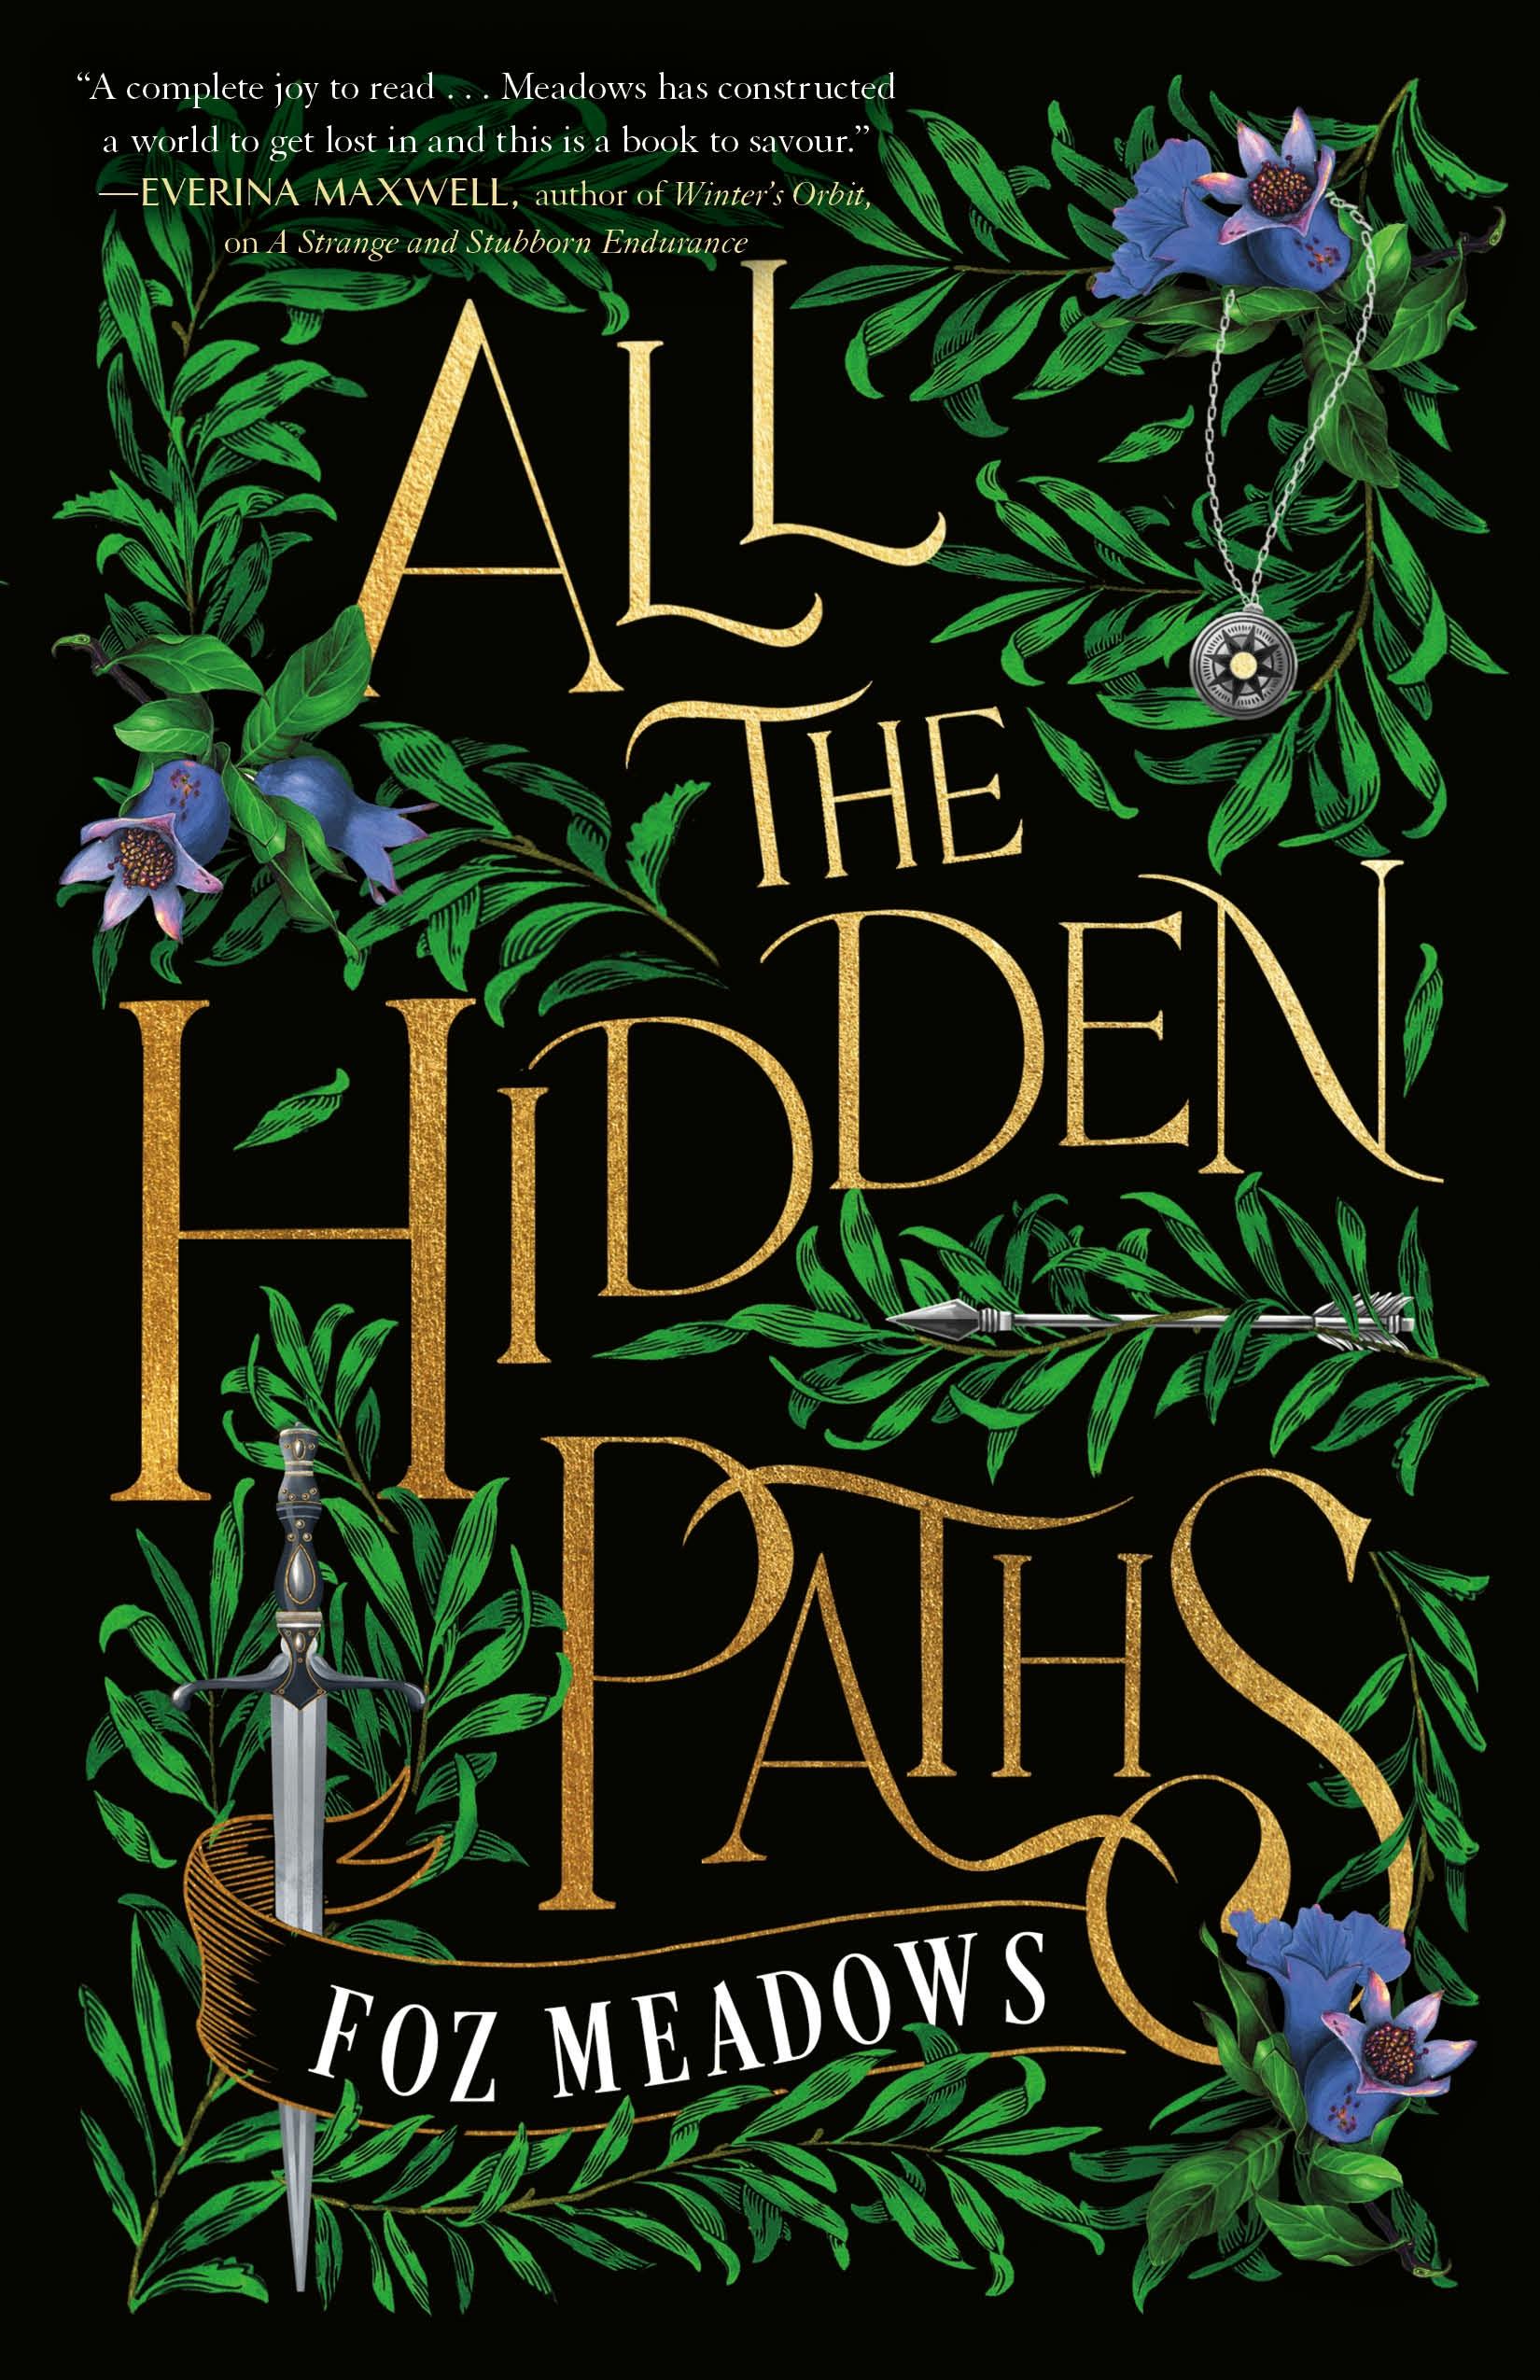 Cover for the book titled as: All the Hidden Paths